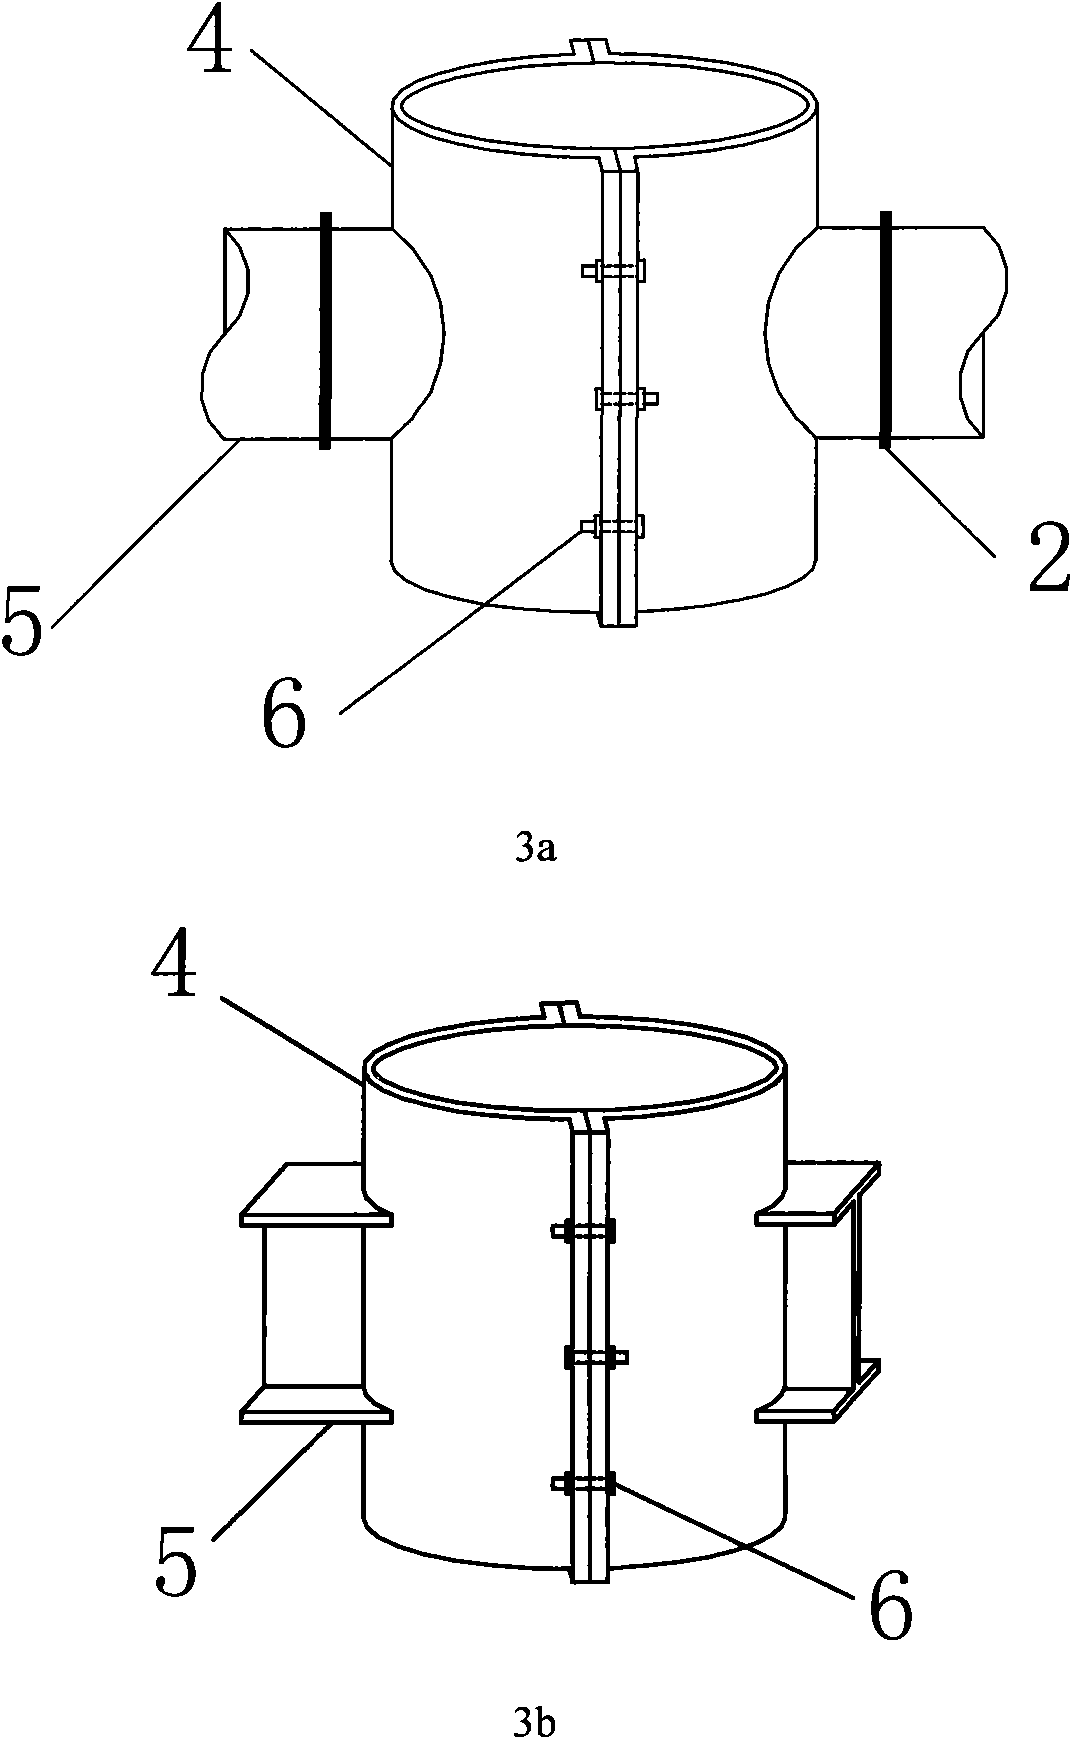 Circular steel tube concrete column and beam node connecting structure